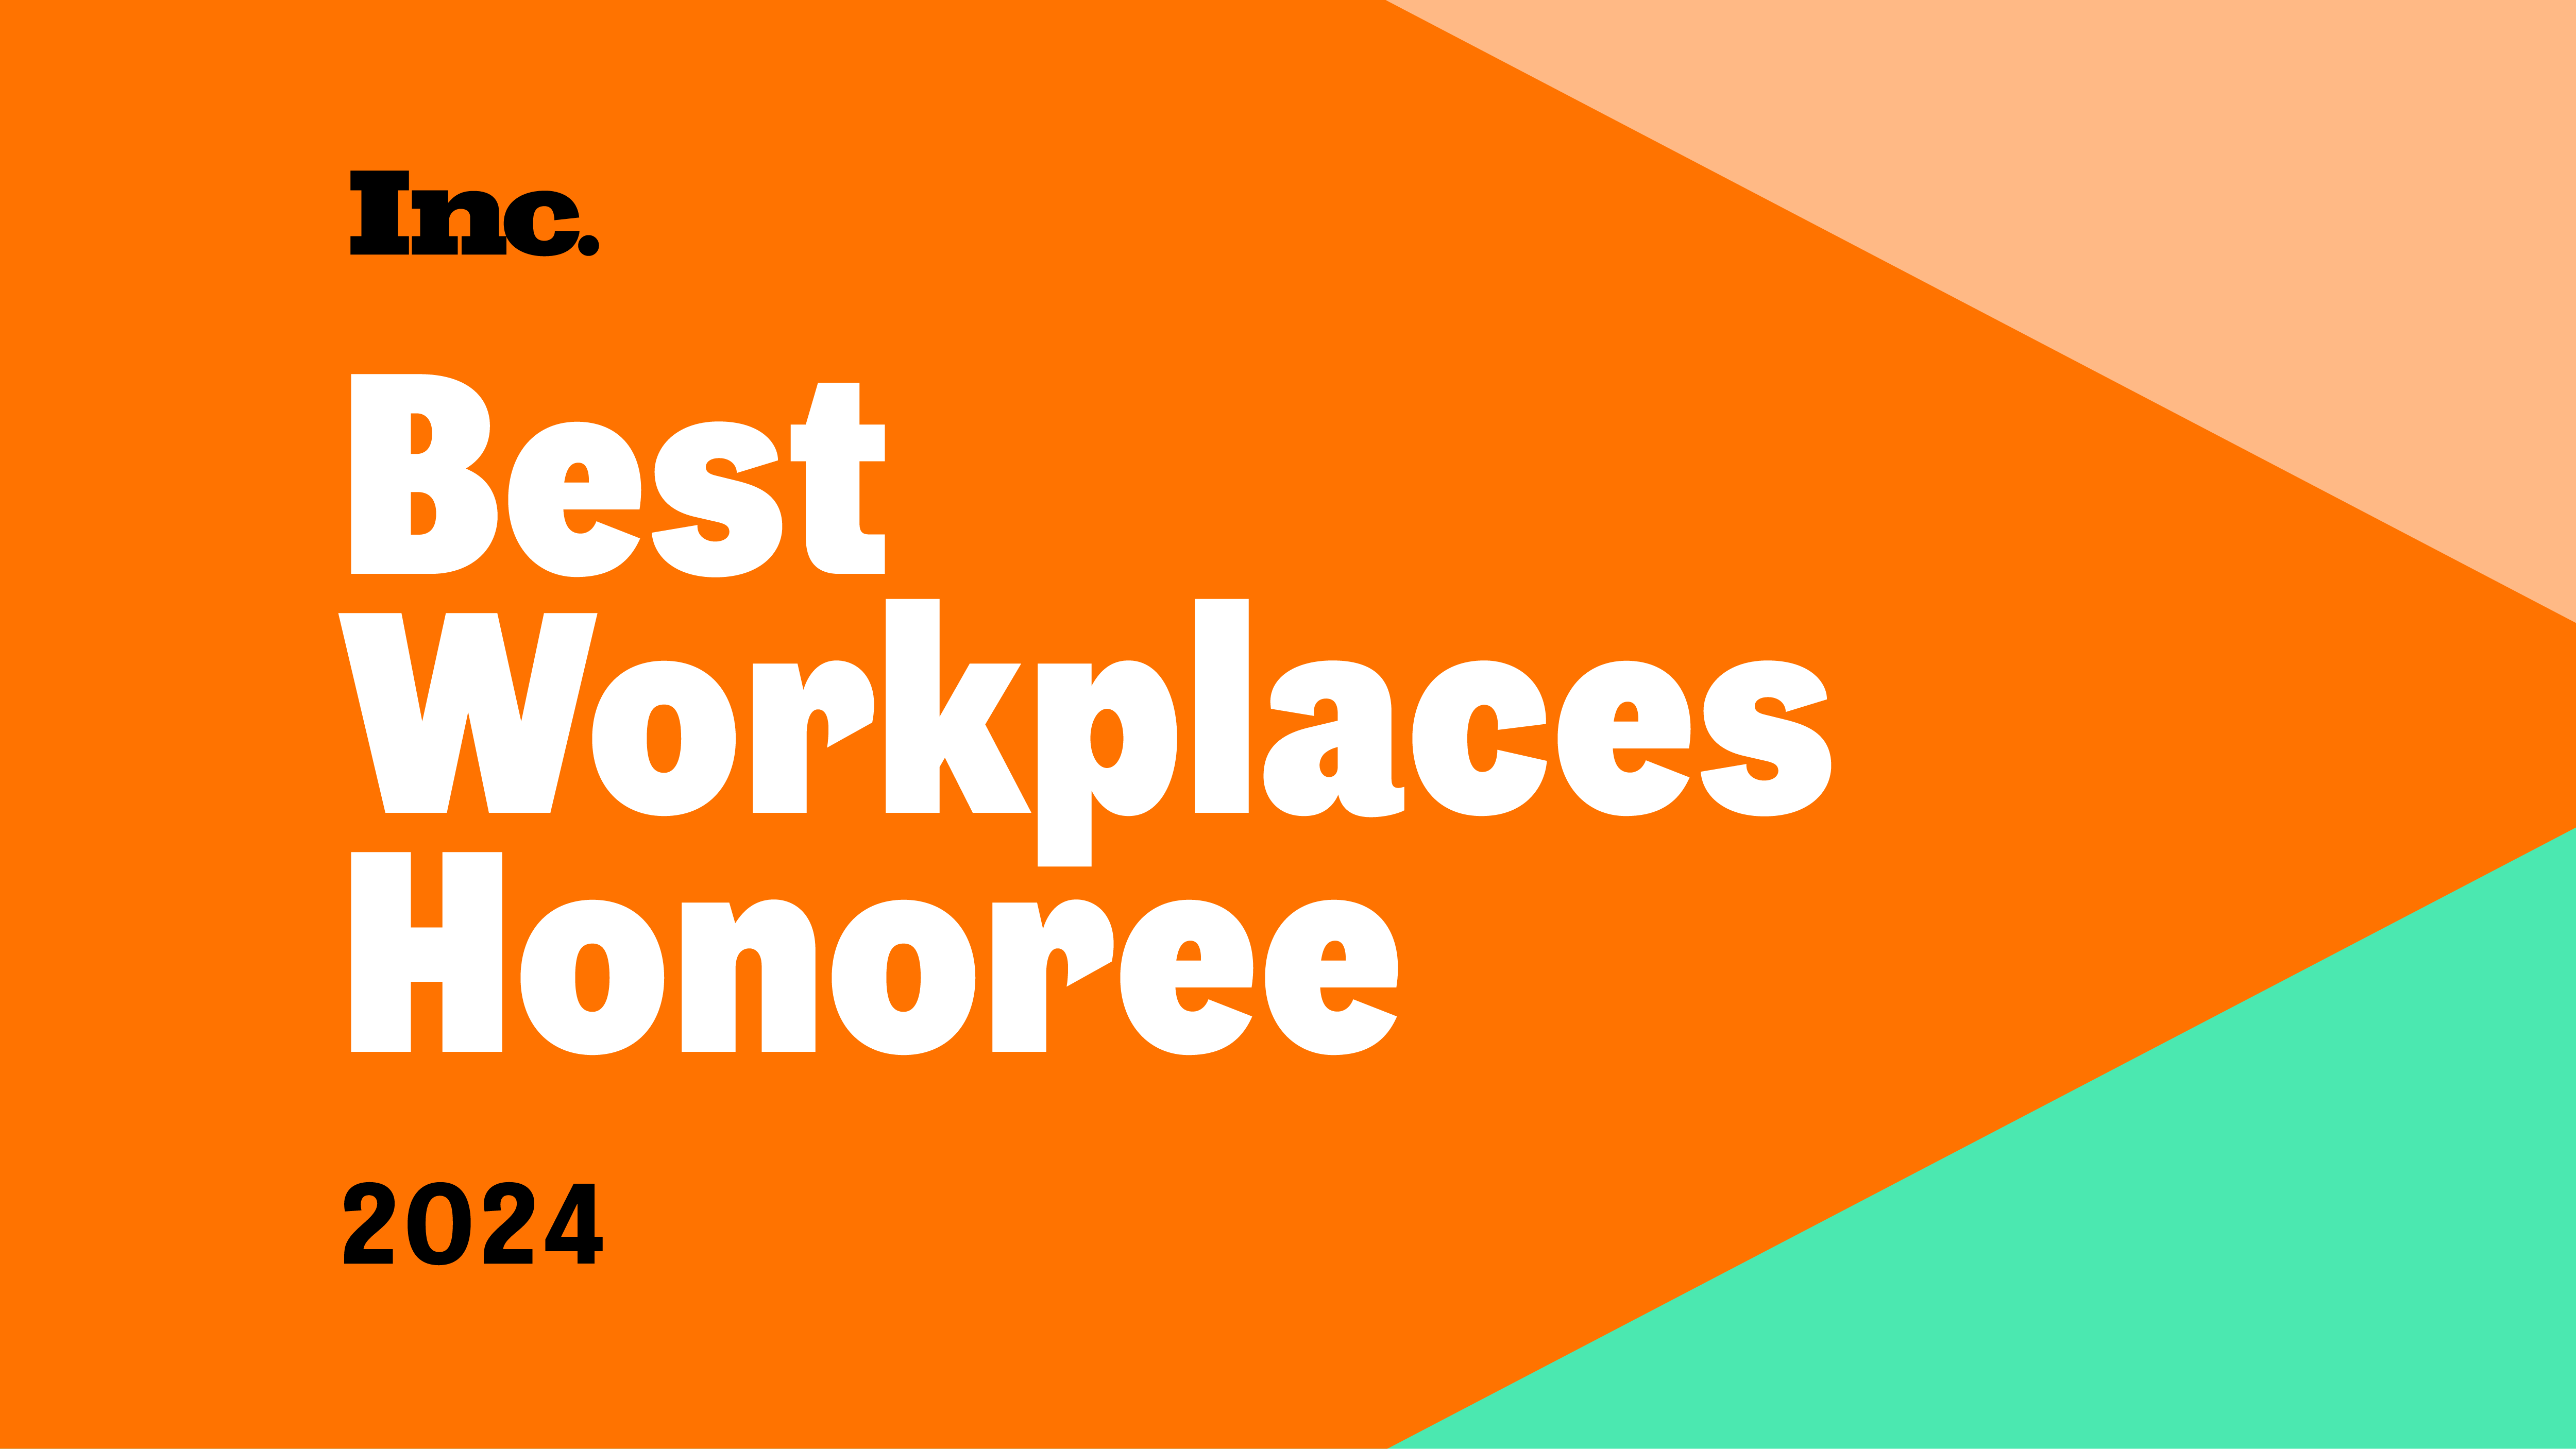 Scan123 Named an Inc. Magazine Best Workplace of 2024